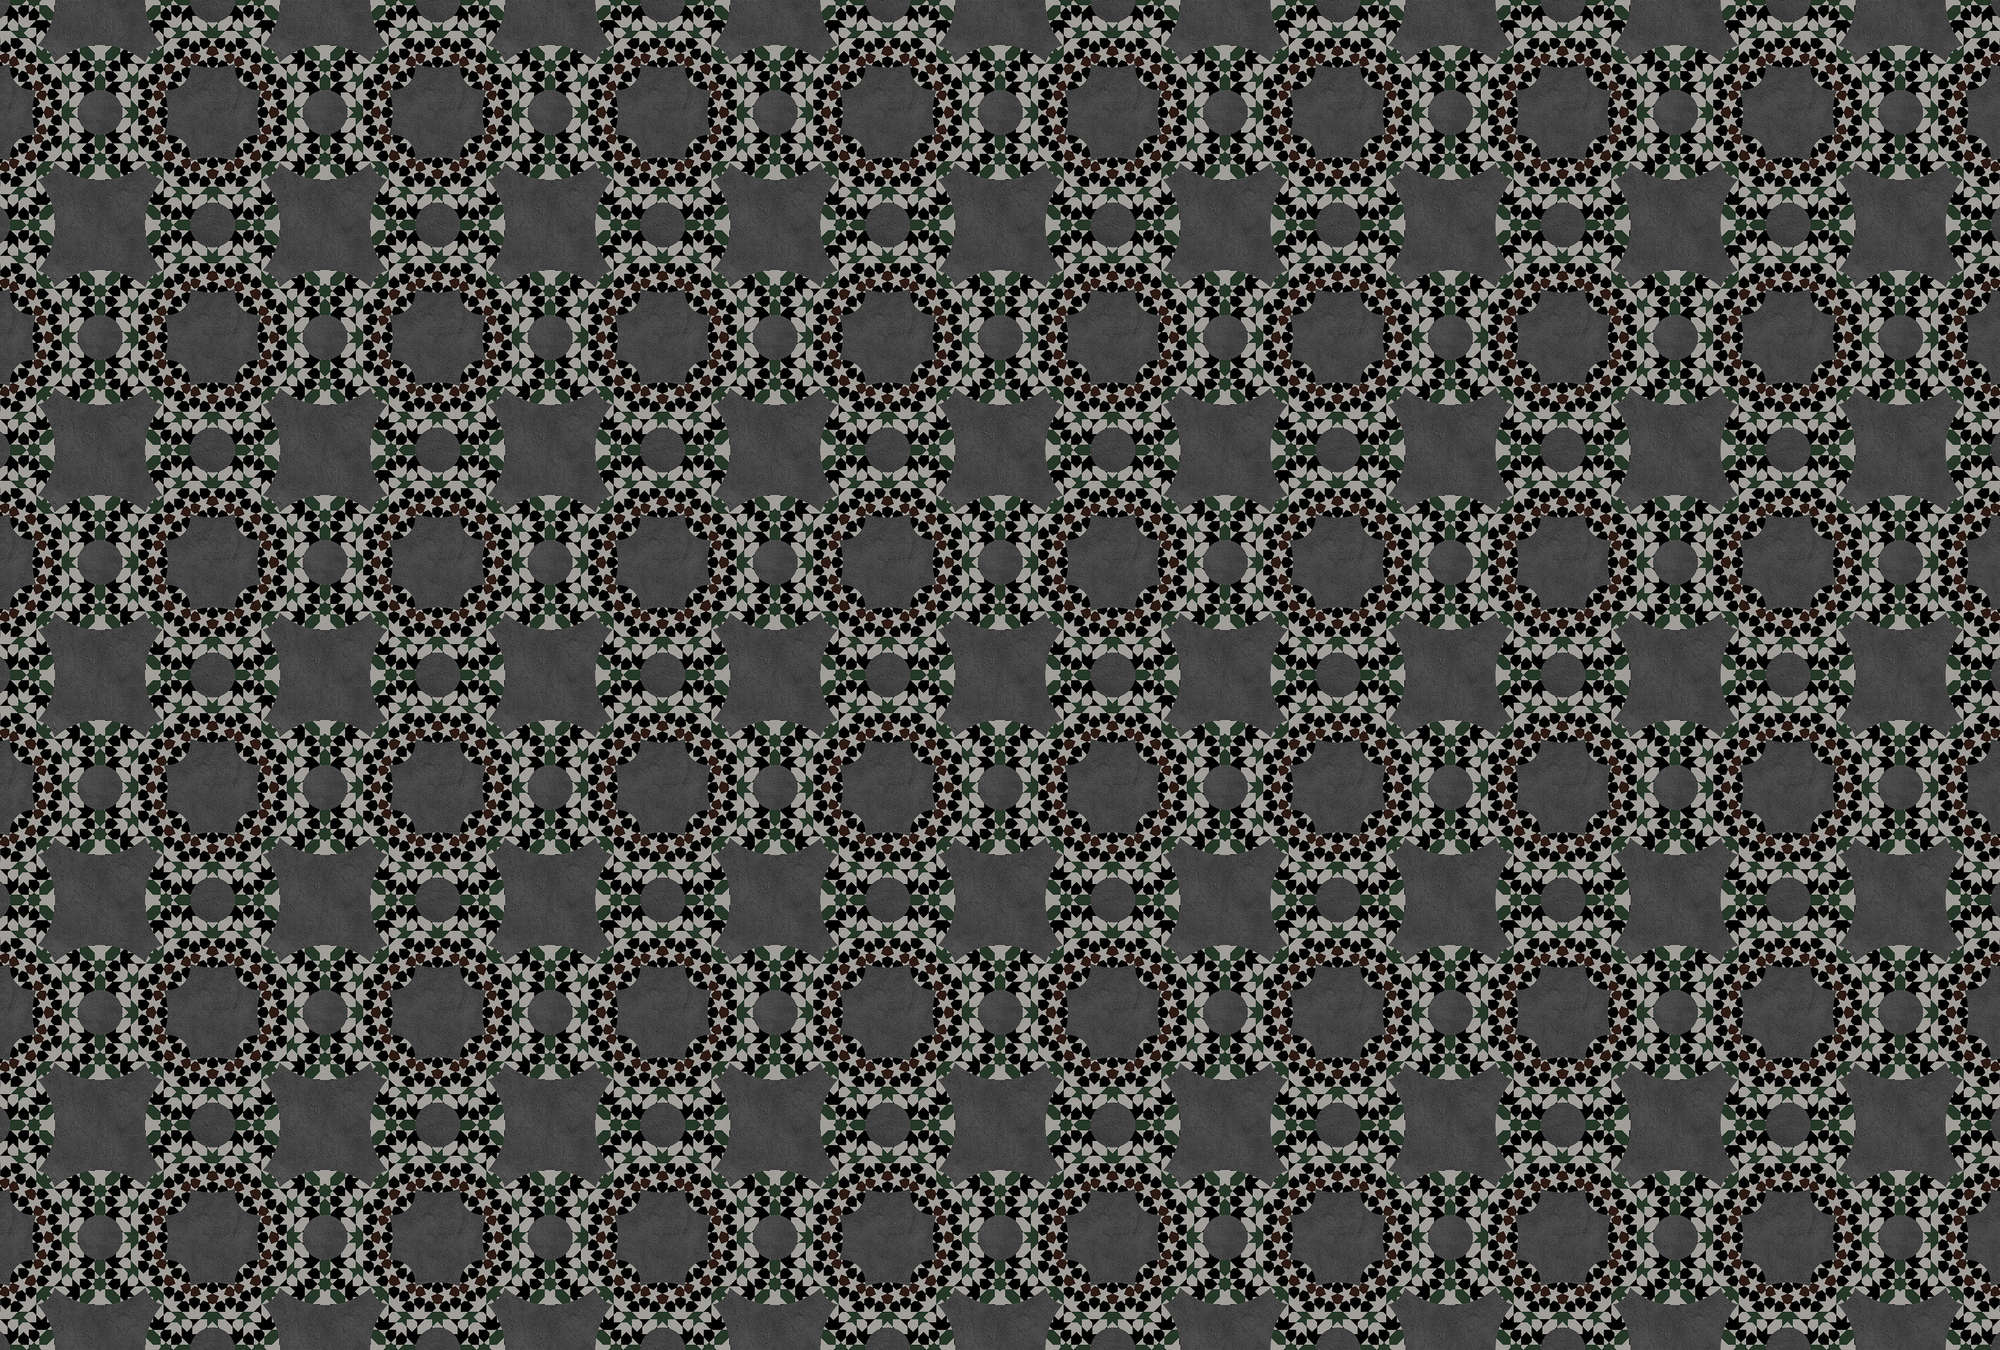             Graphic design mural grey with mosaic effect
        